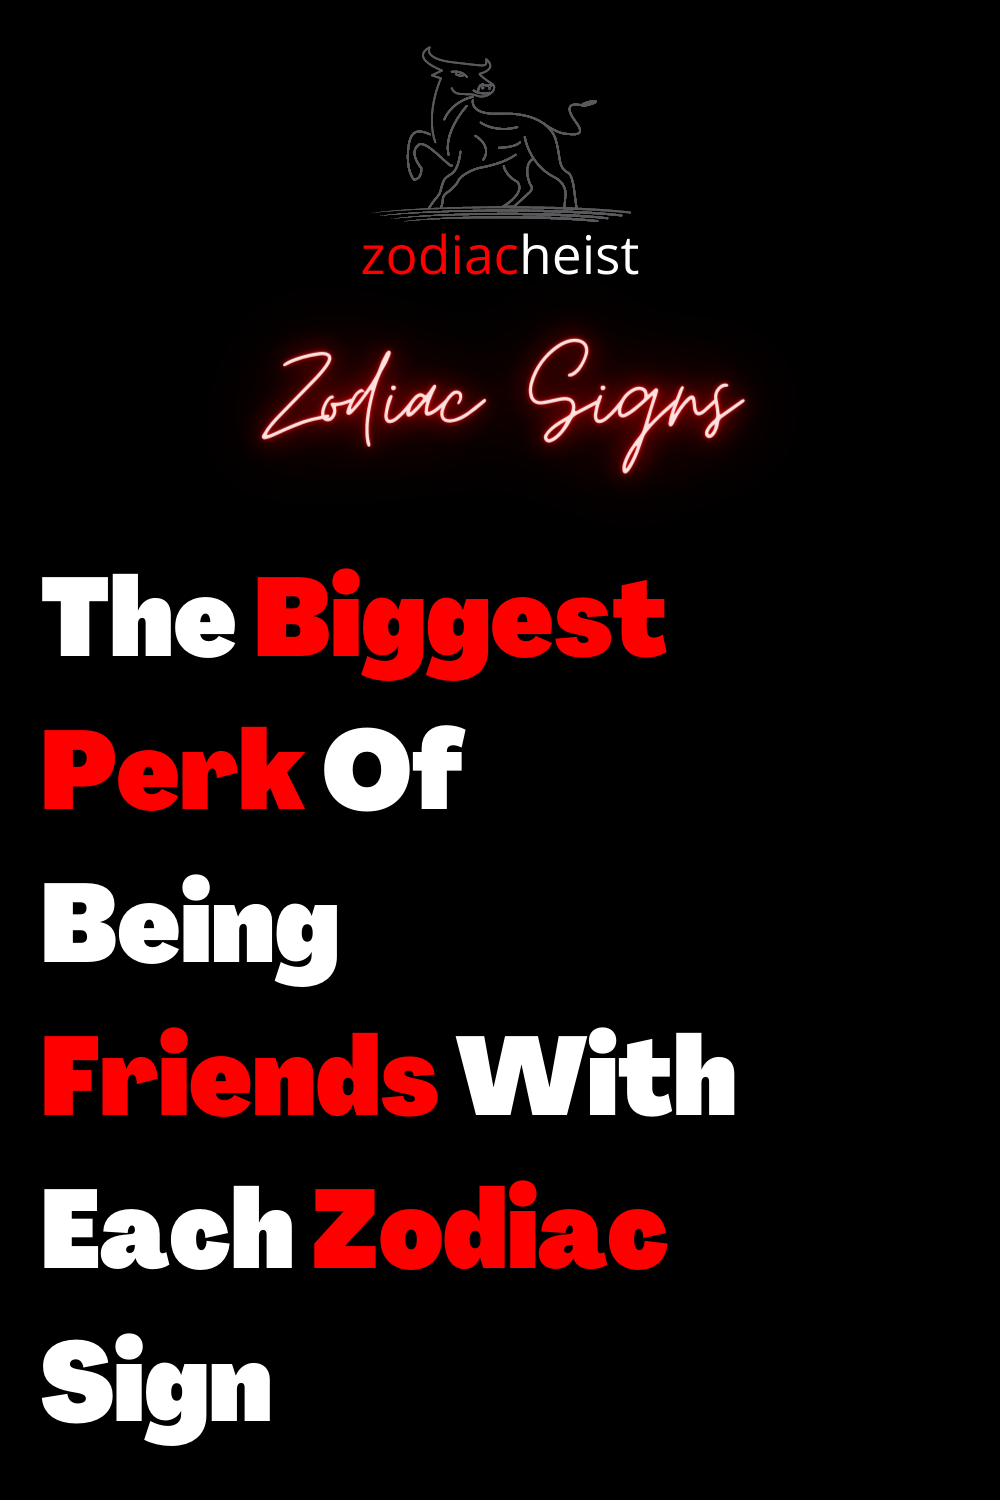 The Biggest Perk Of Being Friends With Each Zodiac Sign